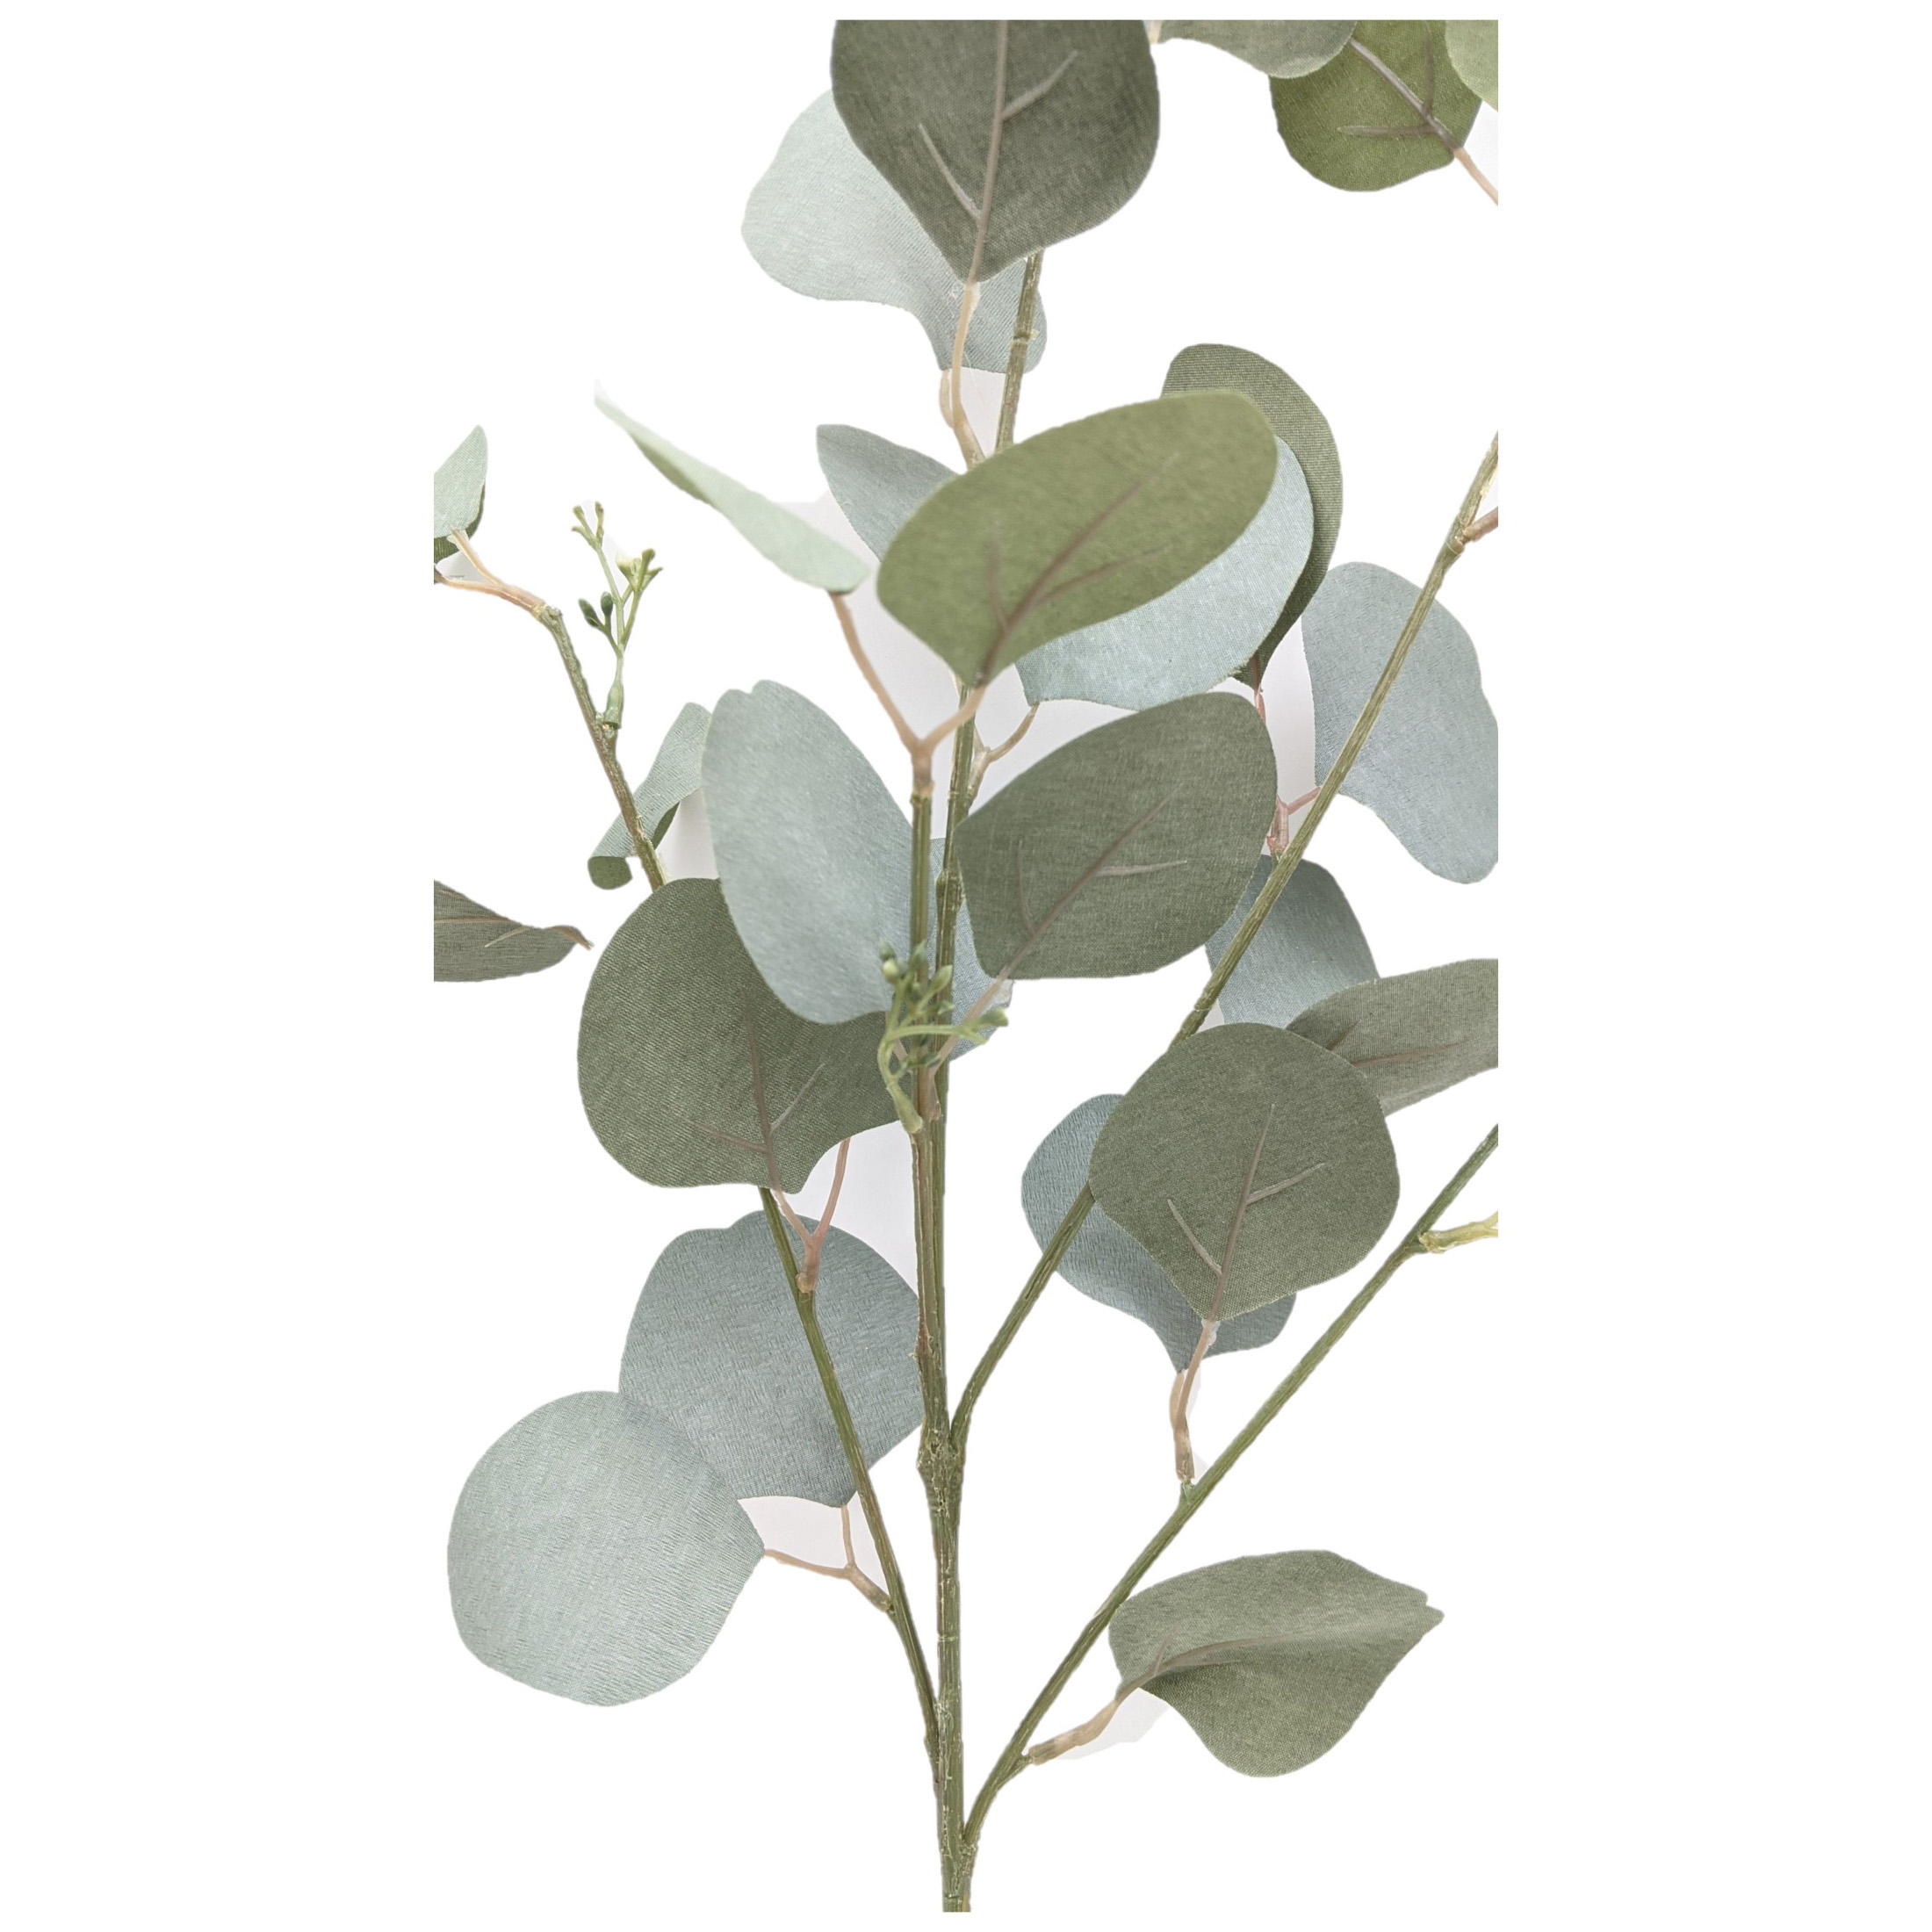 Mainstays Artificial Green Round Leaf Eucalyptus Stem, 34in Tall Floral Picks - image 2 of 5